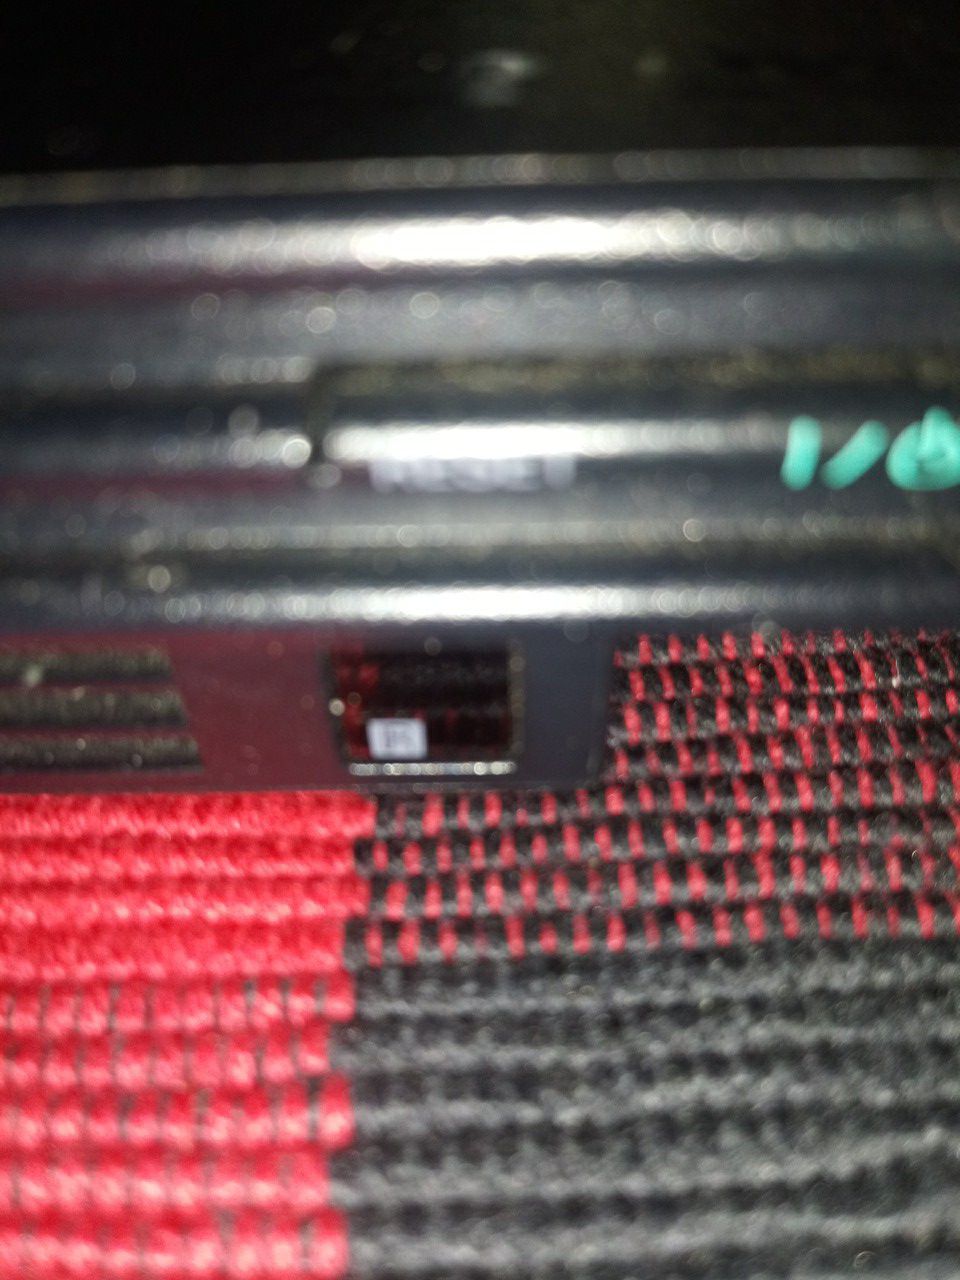 PlayStation 2 untested it light turns red and green no game